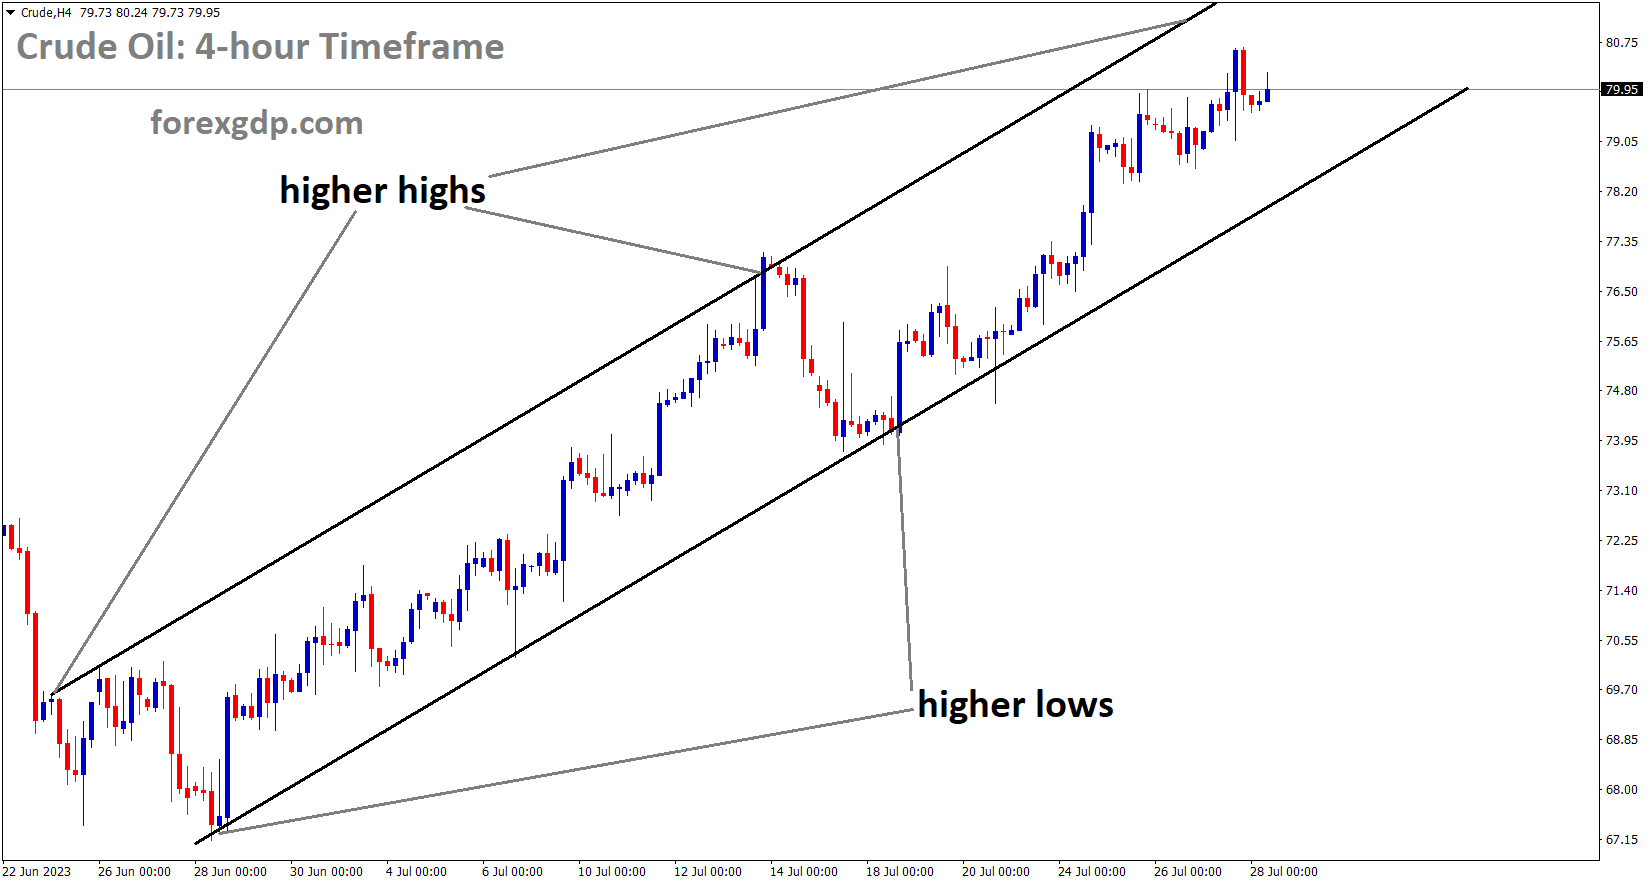 Crude Oil is moving in an Ascending channel and the market has reached the higher high area of the channel 1